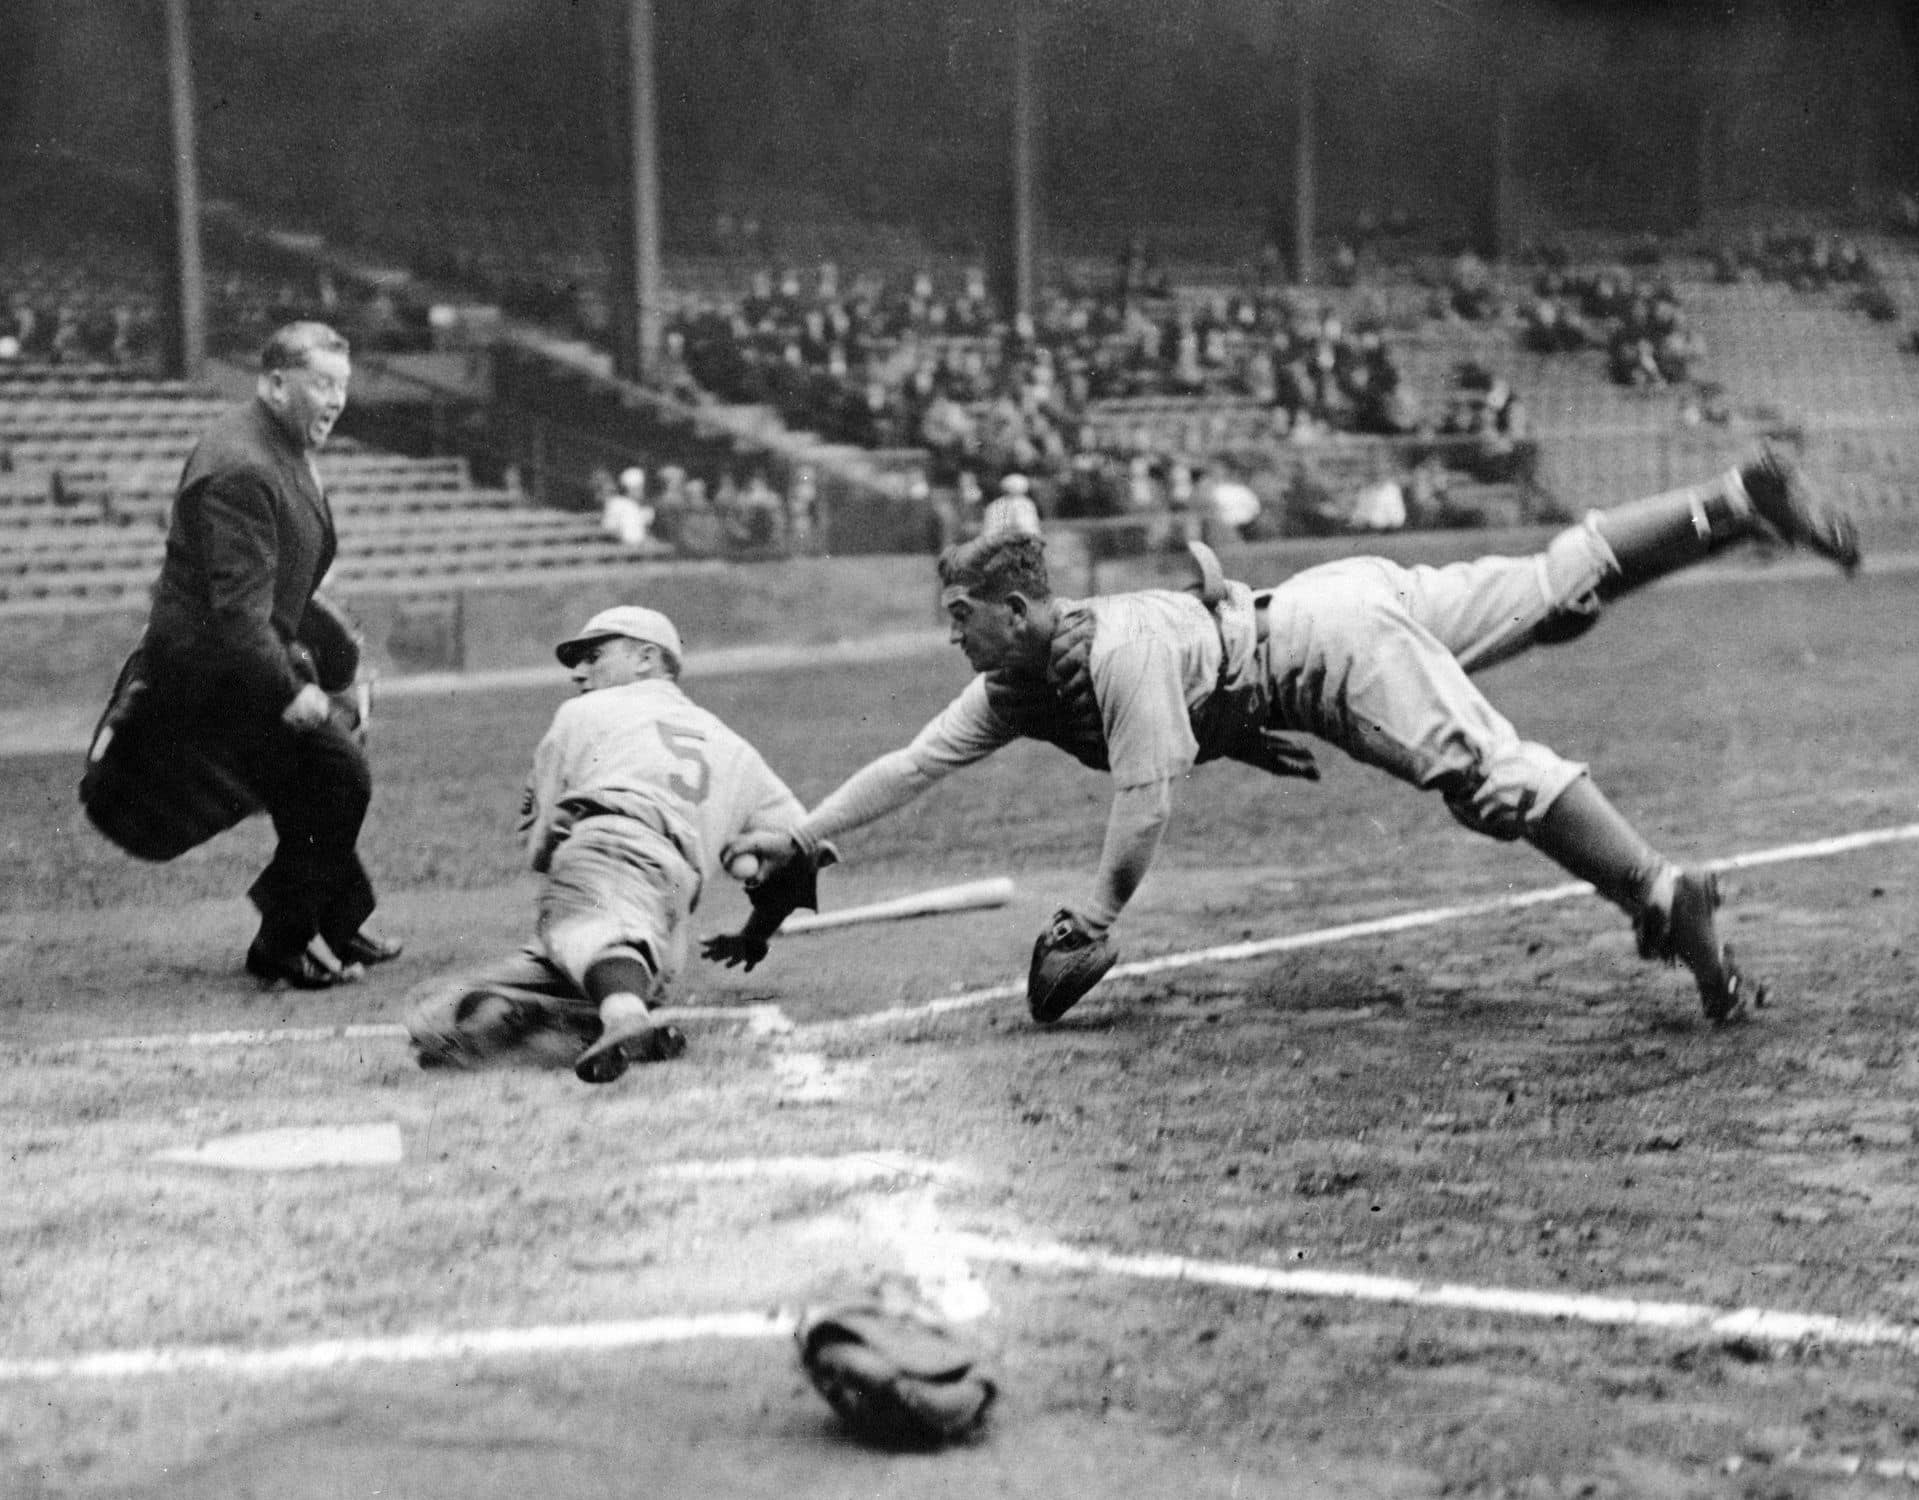 Mickey Cochrane diving to make the tag